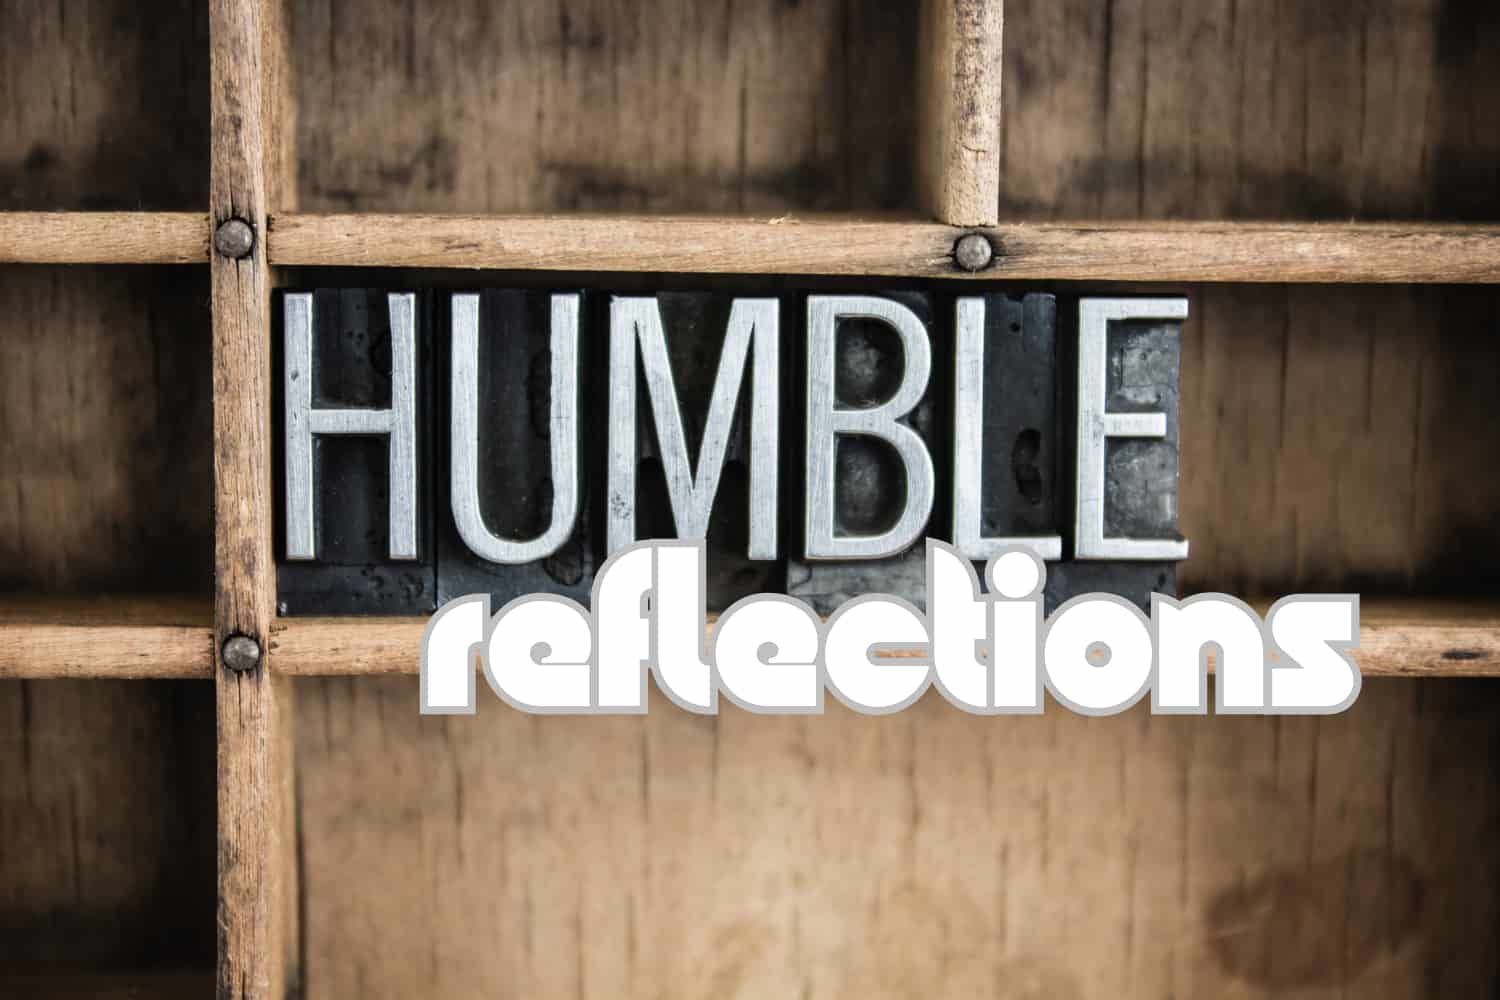 Object%20lesson%20-%20NT%20The%20pharisee%20and%20the%20tax%20collector%20-%20Humble%20reflections-5792de36 Self-image / identity